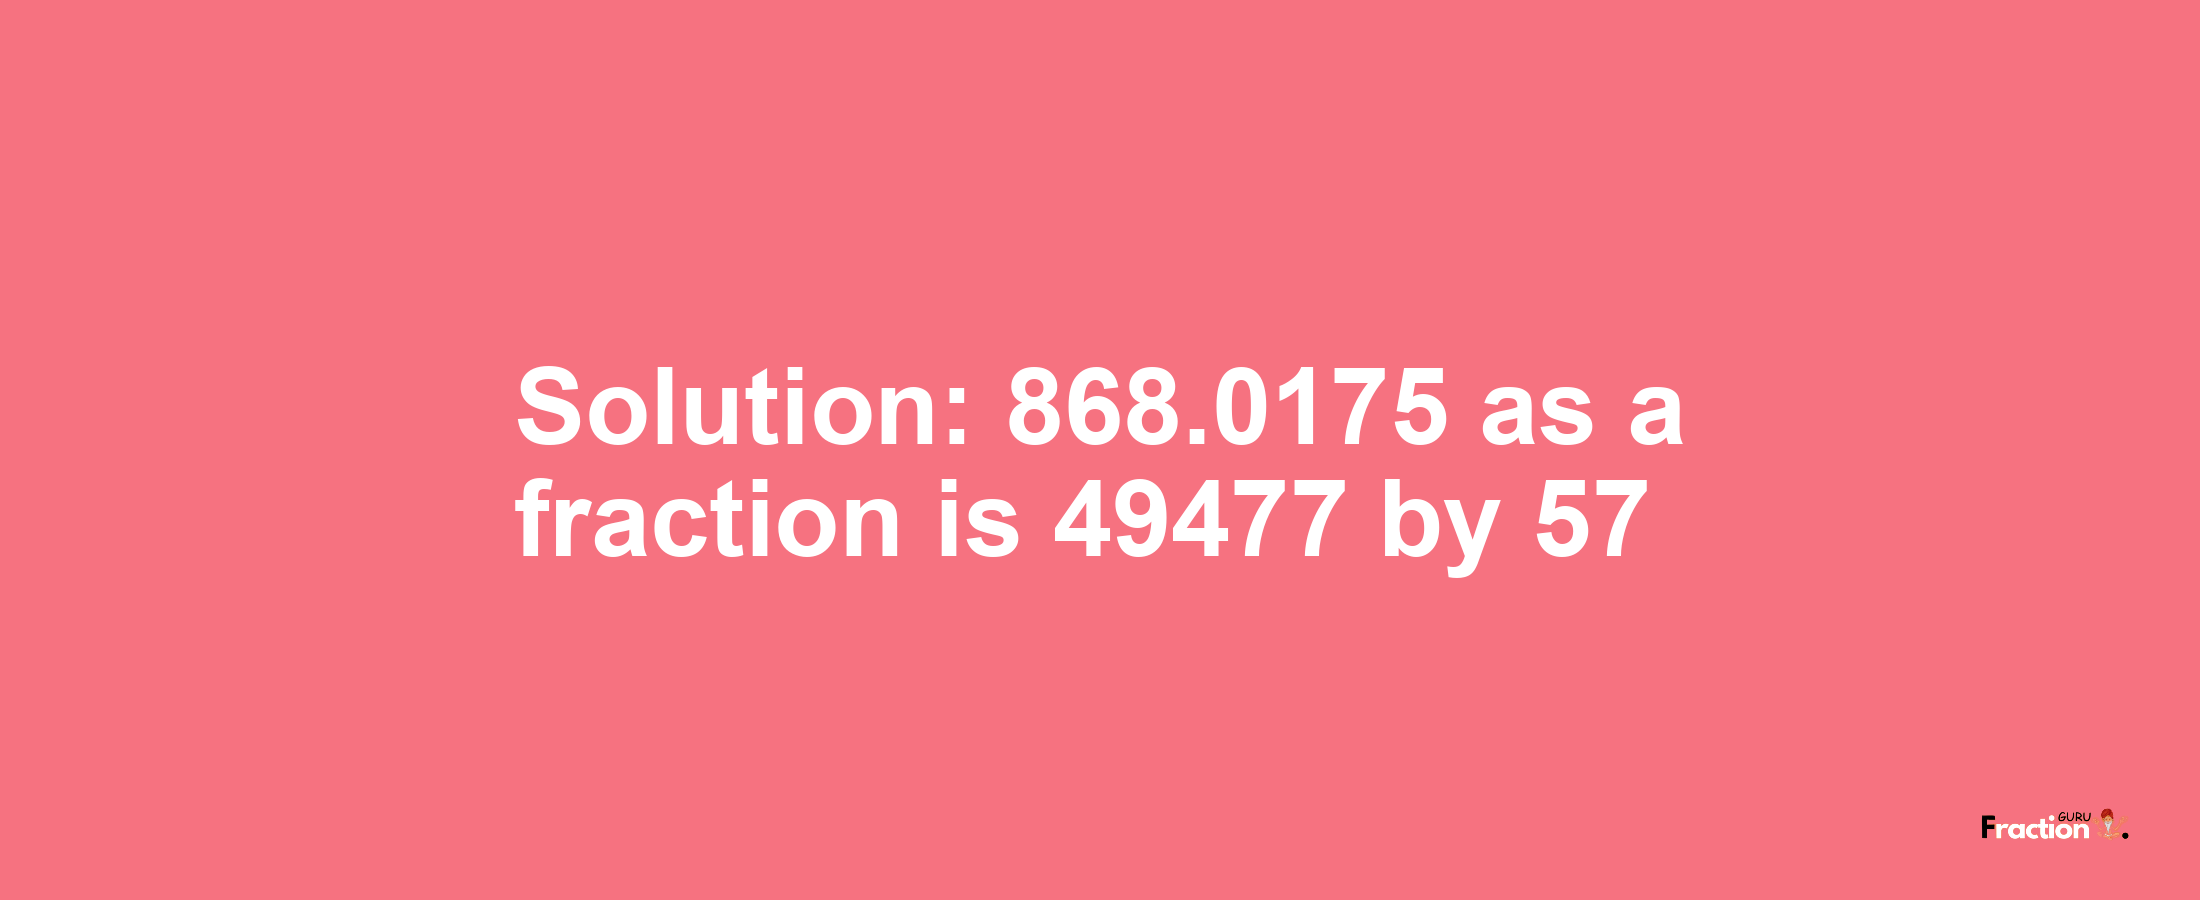 Solution:868.0175 as a fraction is 49477/57